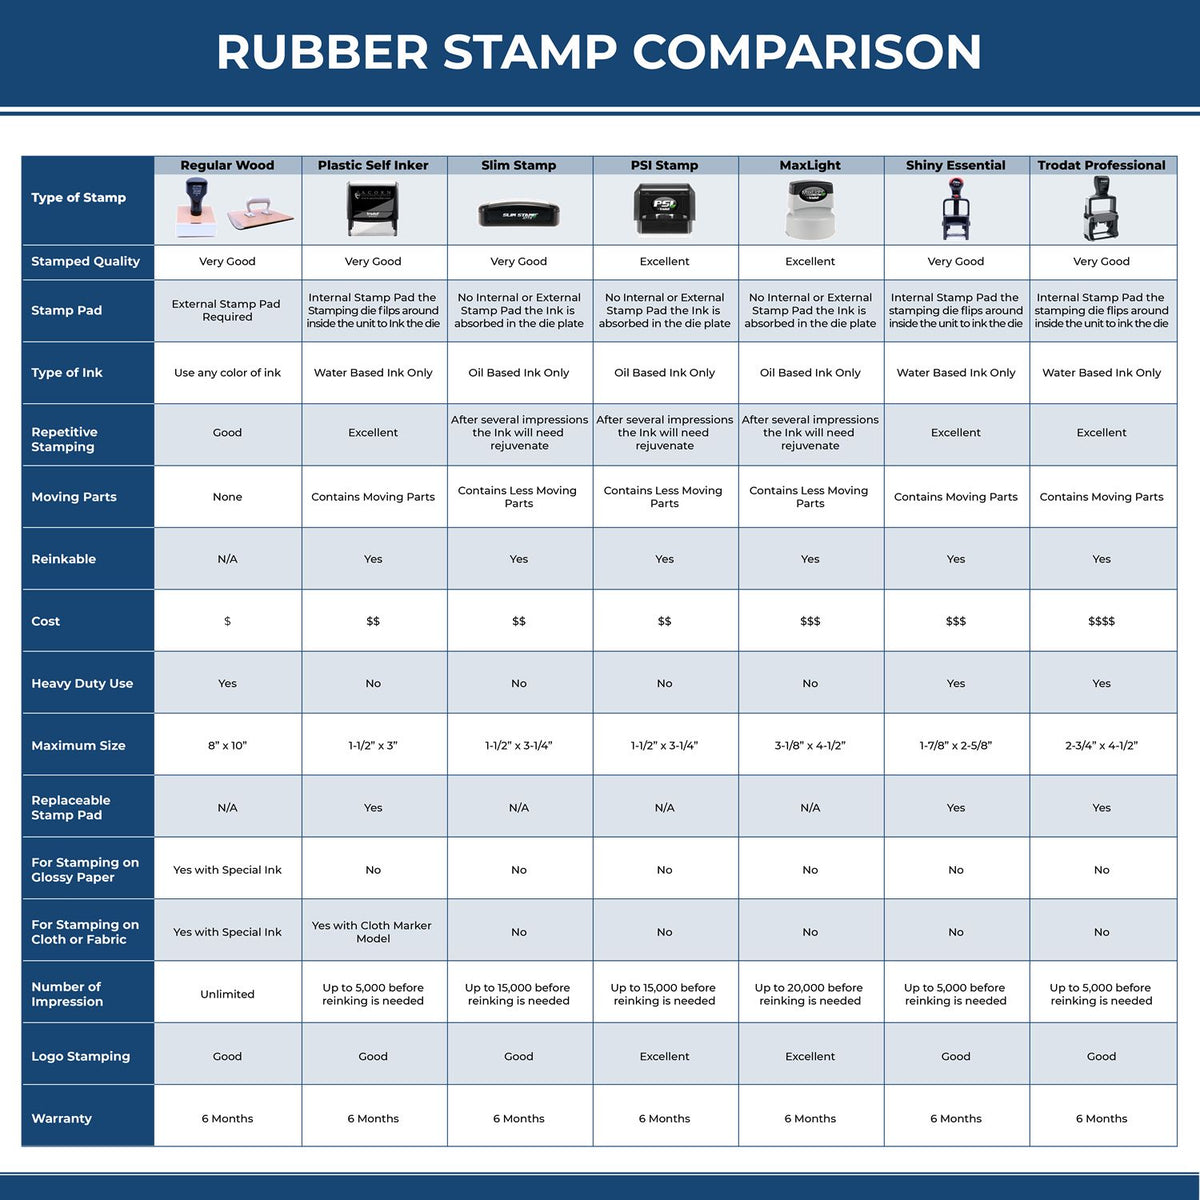 Large Self Inking Closed Stamp 4111S Rubber Stamp Comparison